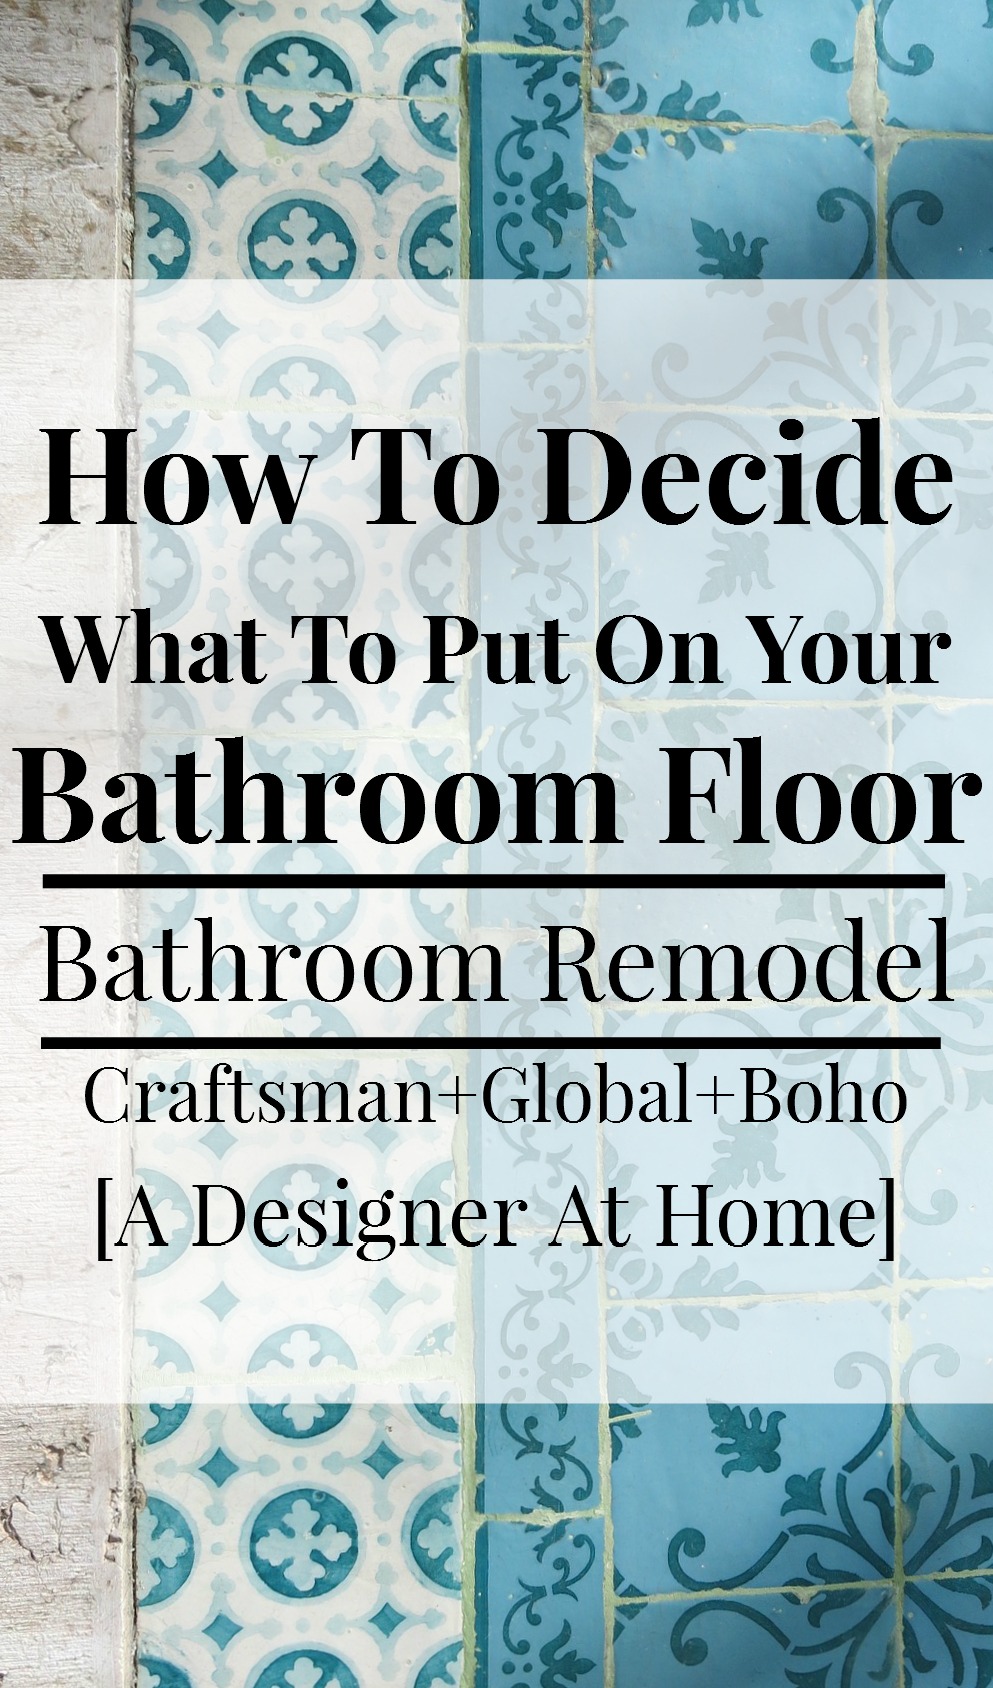 eally helpful insight into choosing which tiles to put on the bathroom floor